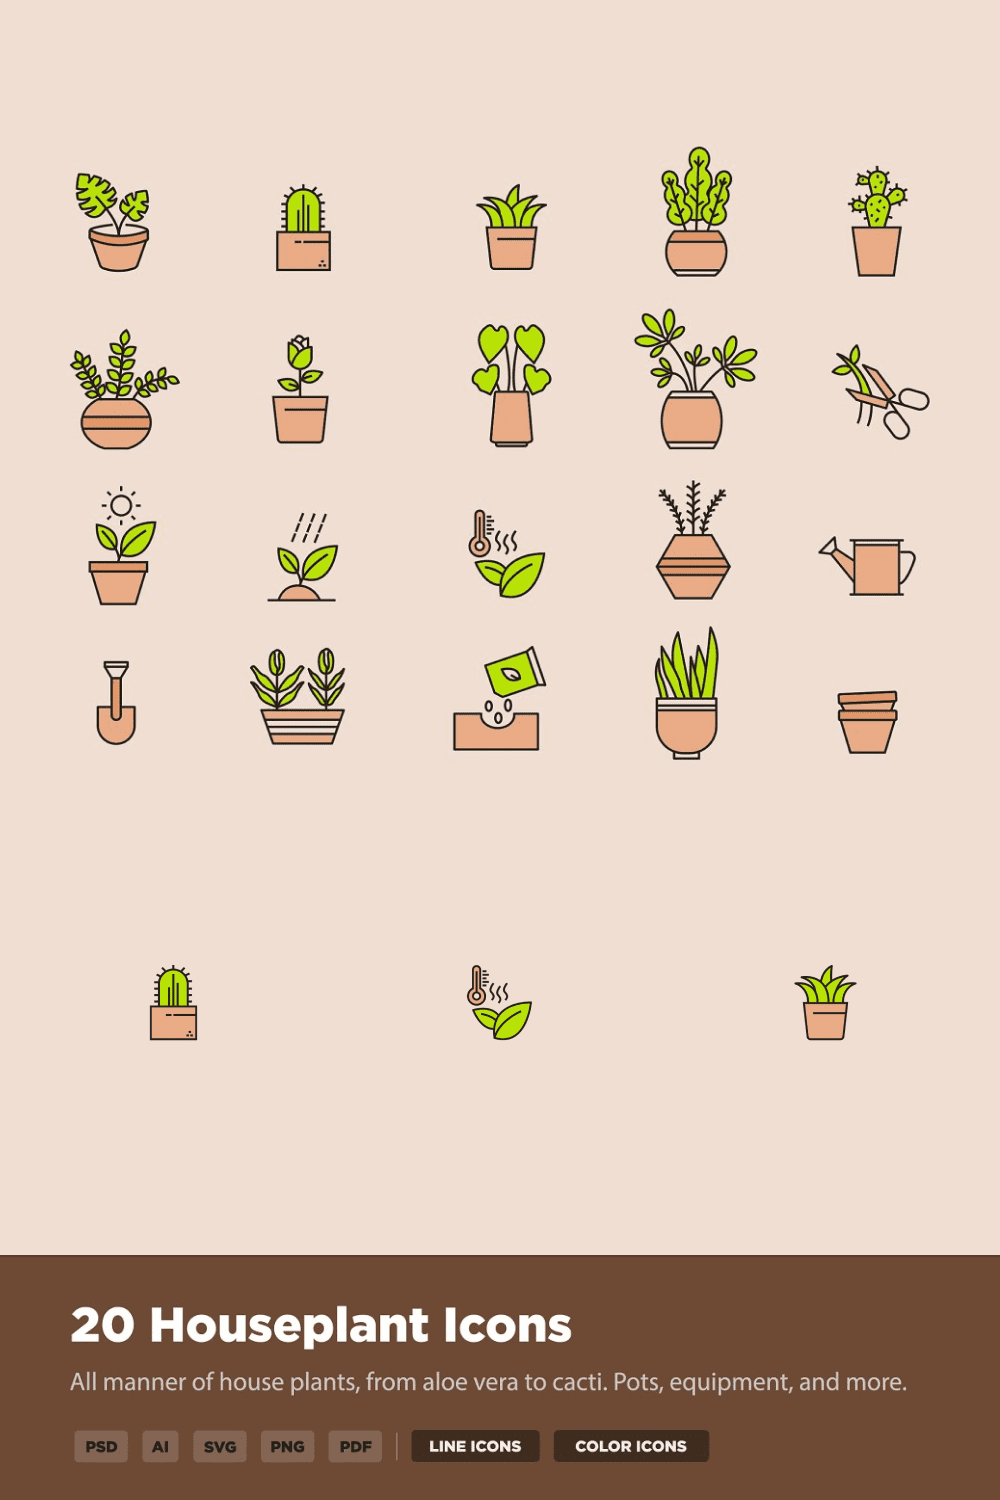 20 houseplant icons - pinterest image preview.